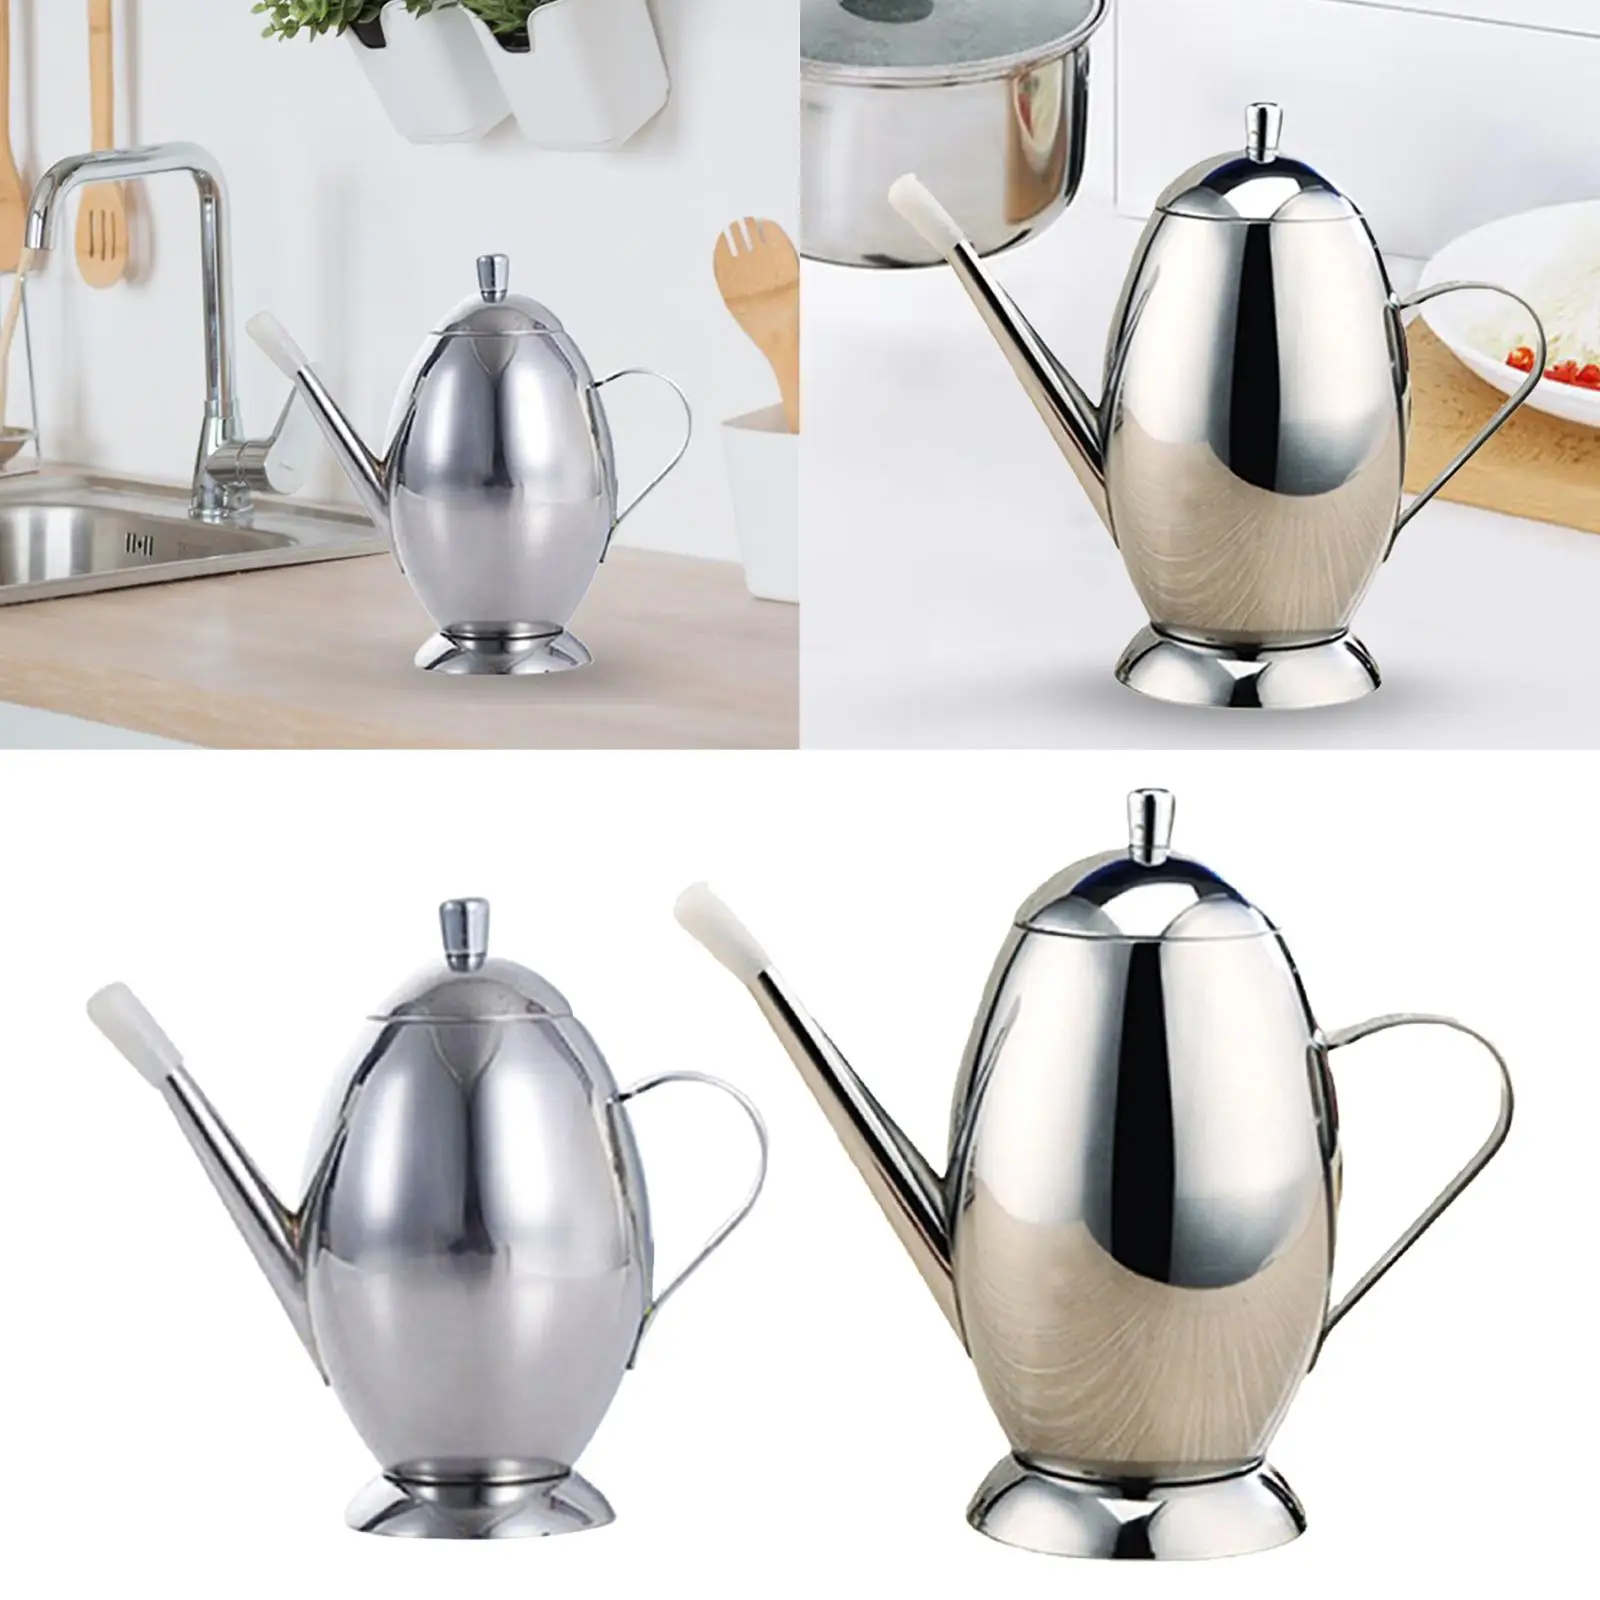 Stainless Steel Oil Pot Dispenser Storage oil Bottle Oil Storage Container Oil Bottle for Camping Cooking Kitchen Home